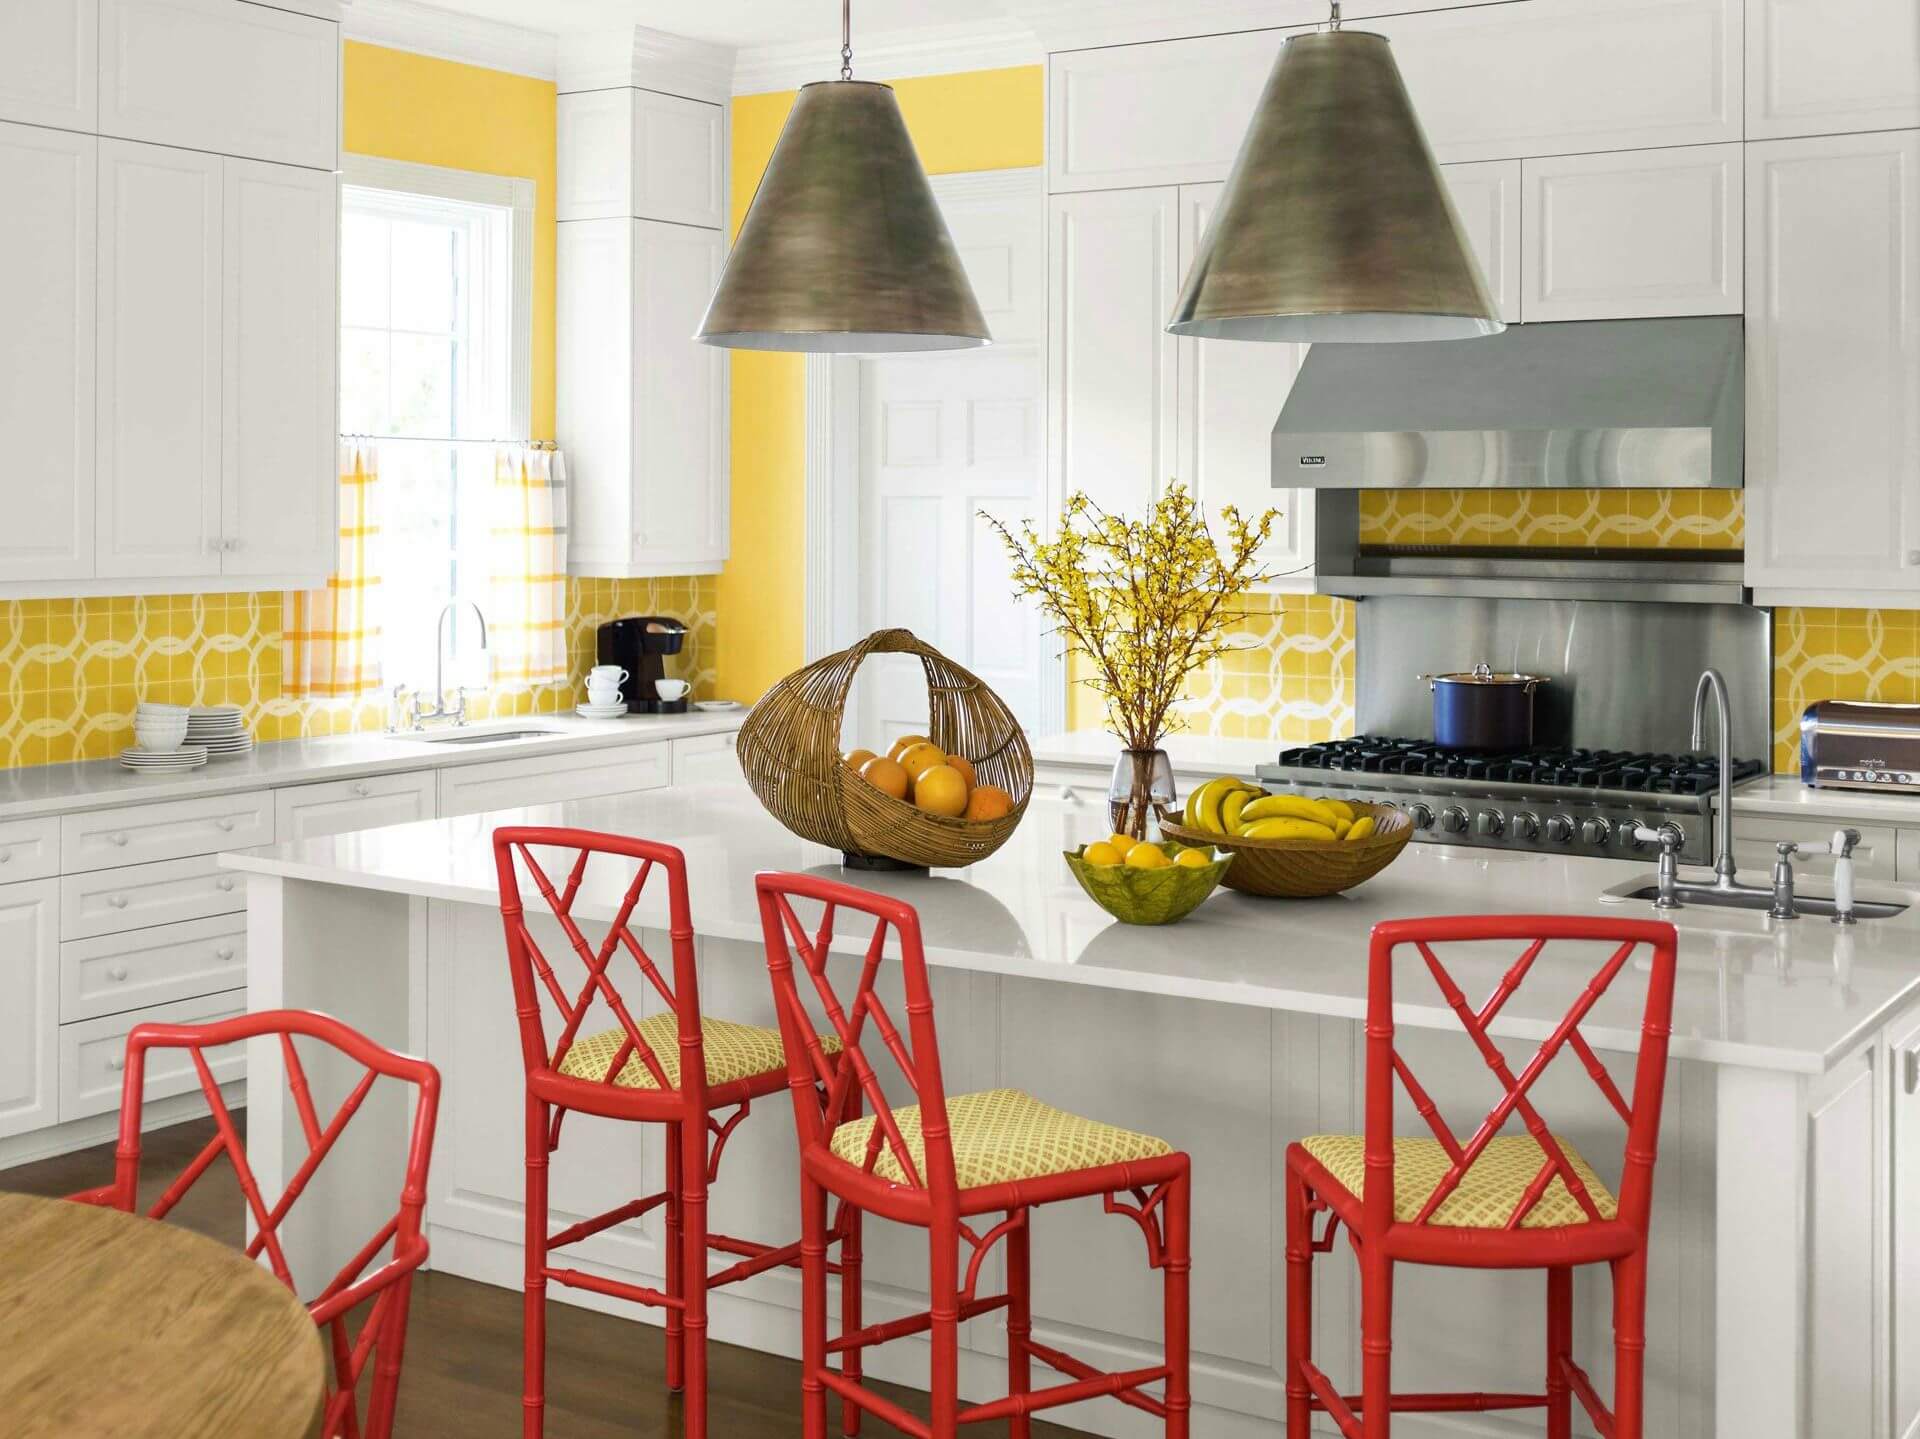 A kitchen with yellow walls and red stools.